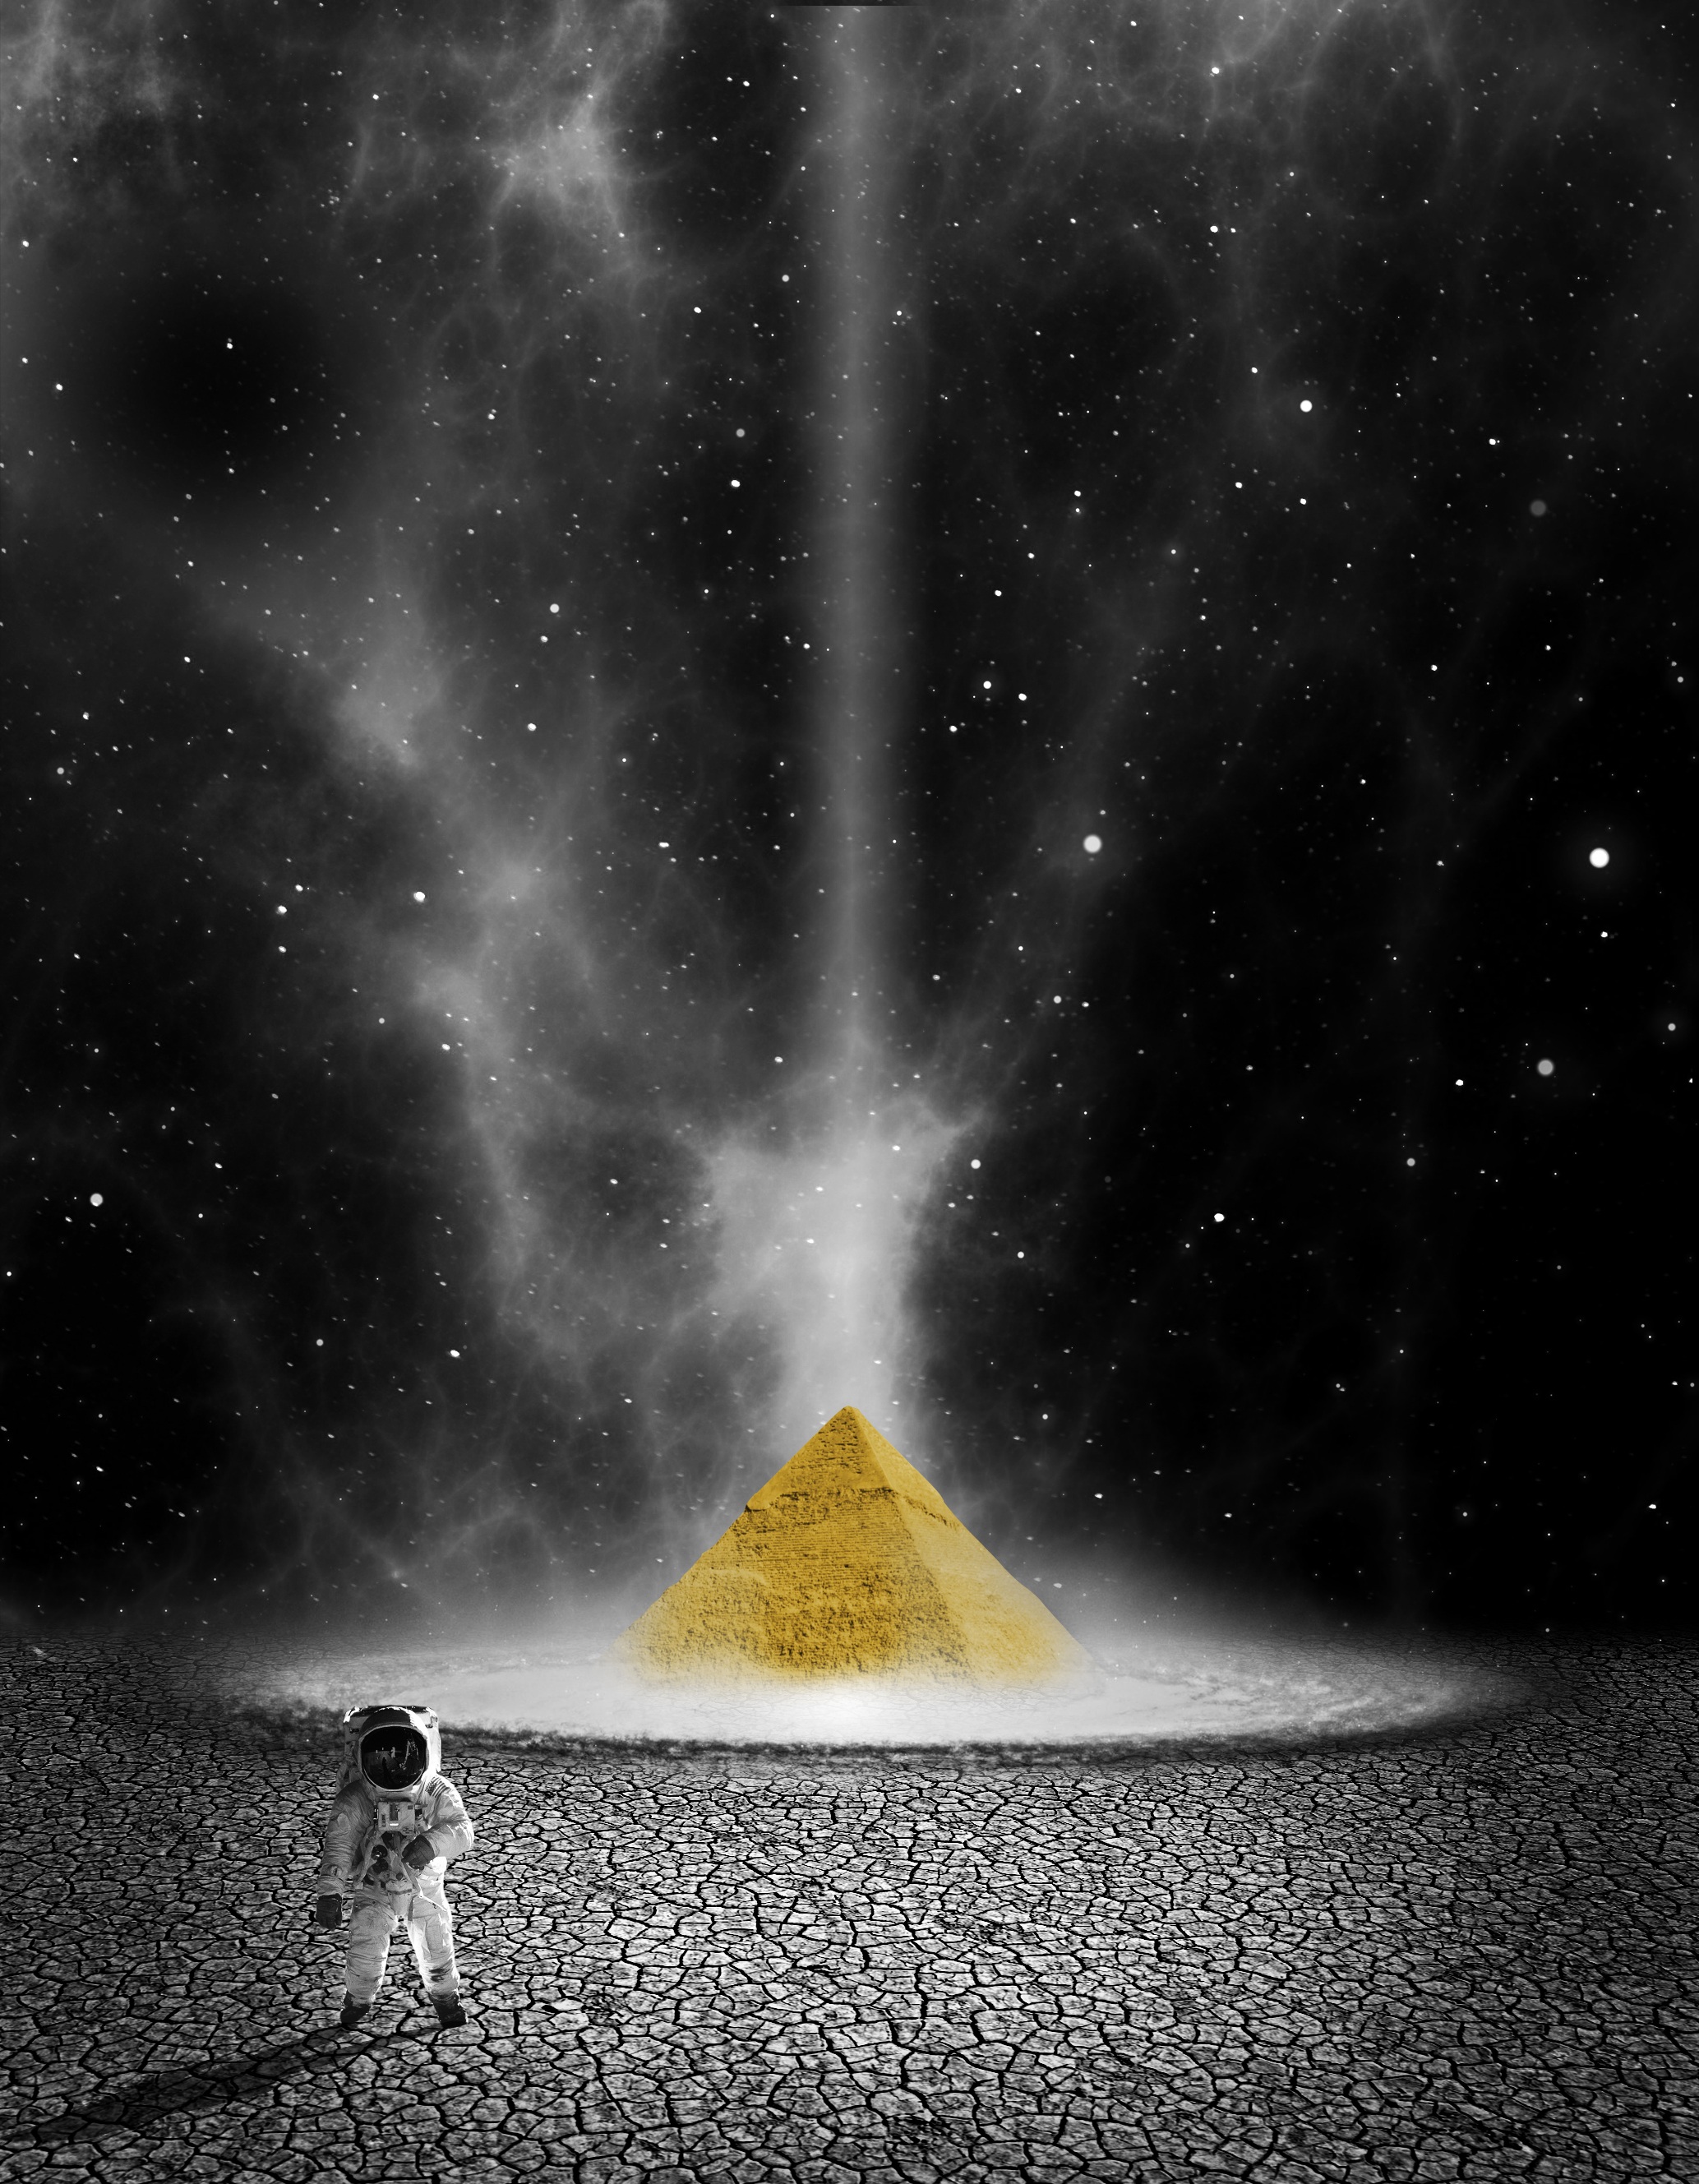 118847 Screensavers and Wallpapers Pyramid for phone. Download universe, planet, photoshop, astronaut, pyramid pictures for free